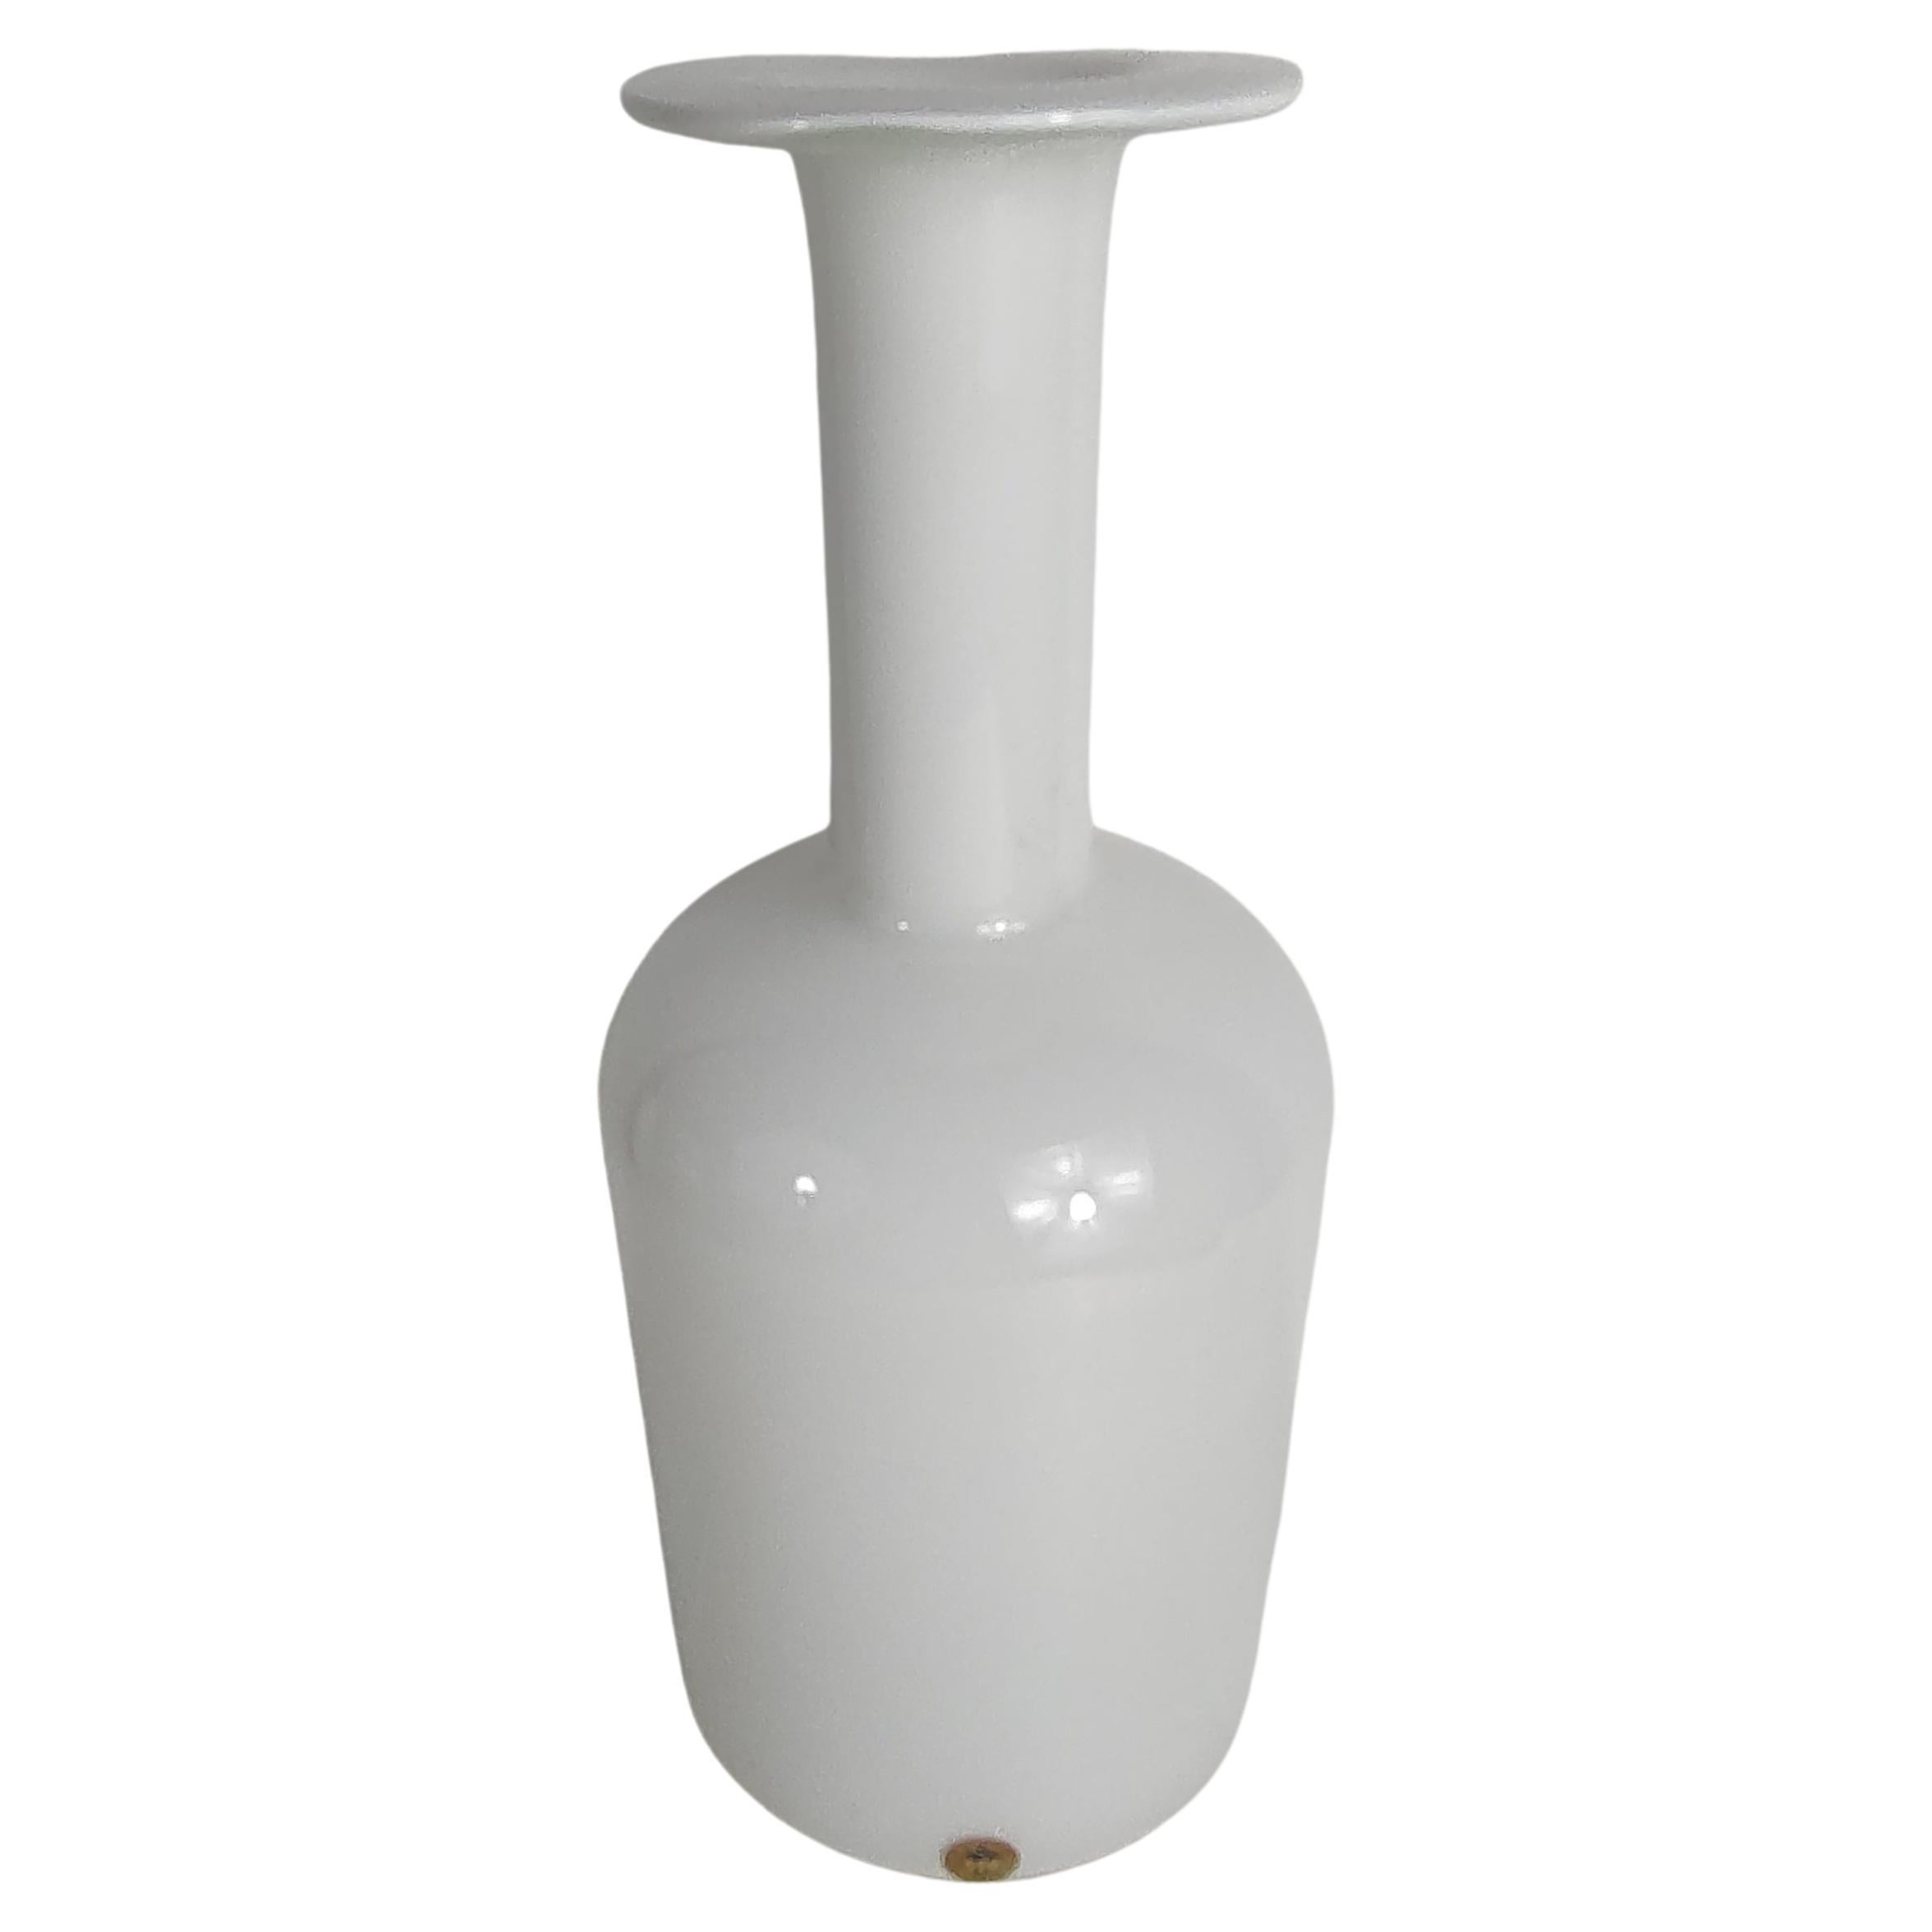 Fabulous art glass bottle form vase by Otto Brauer for kastrup & Holmegaard. Large, 14.25 x 5.75 and has a delicate yet commanding presence. In excellent condition.